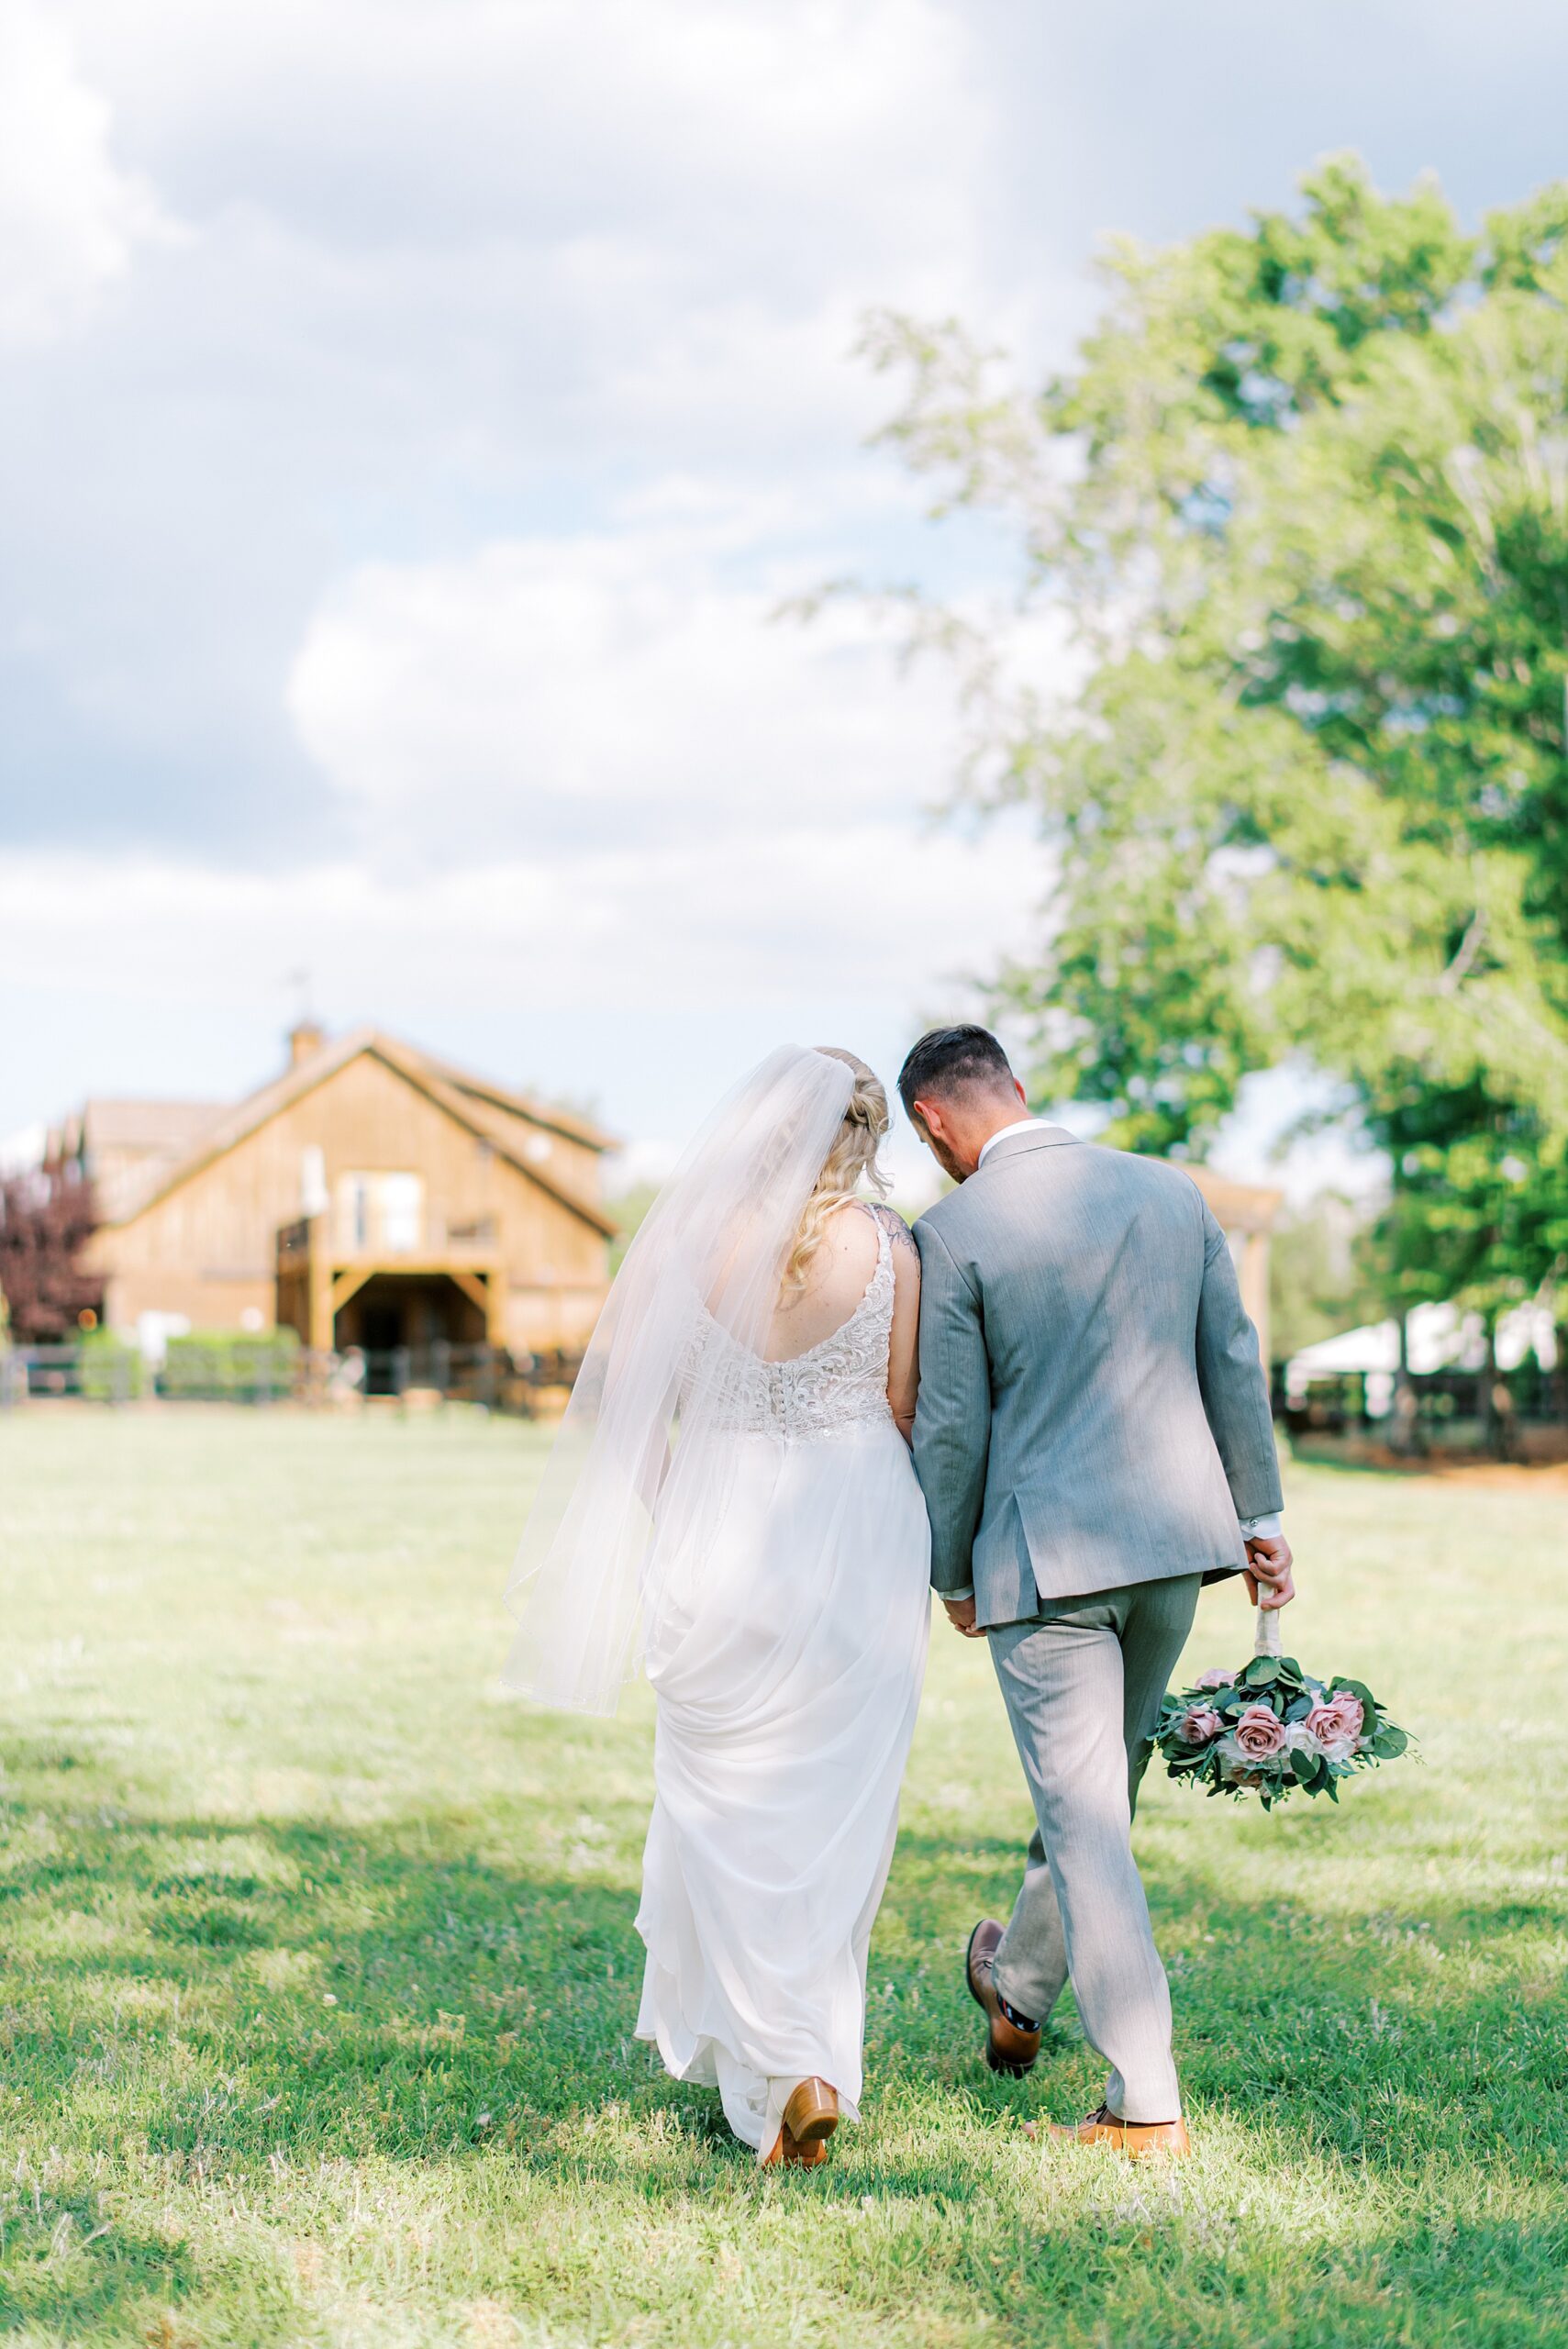 Newlyweds in a grey suit and lace dress hold hands while walking through a large field to a barn at a farm wedding venues charlotte nc